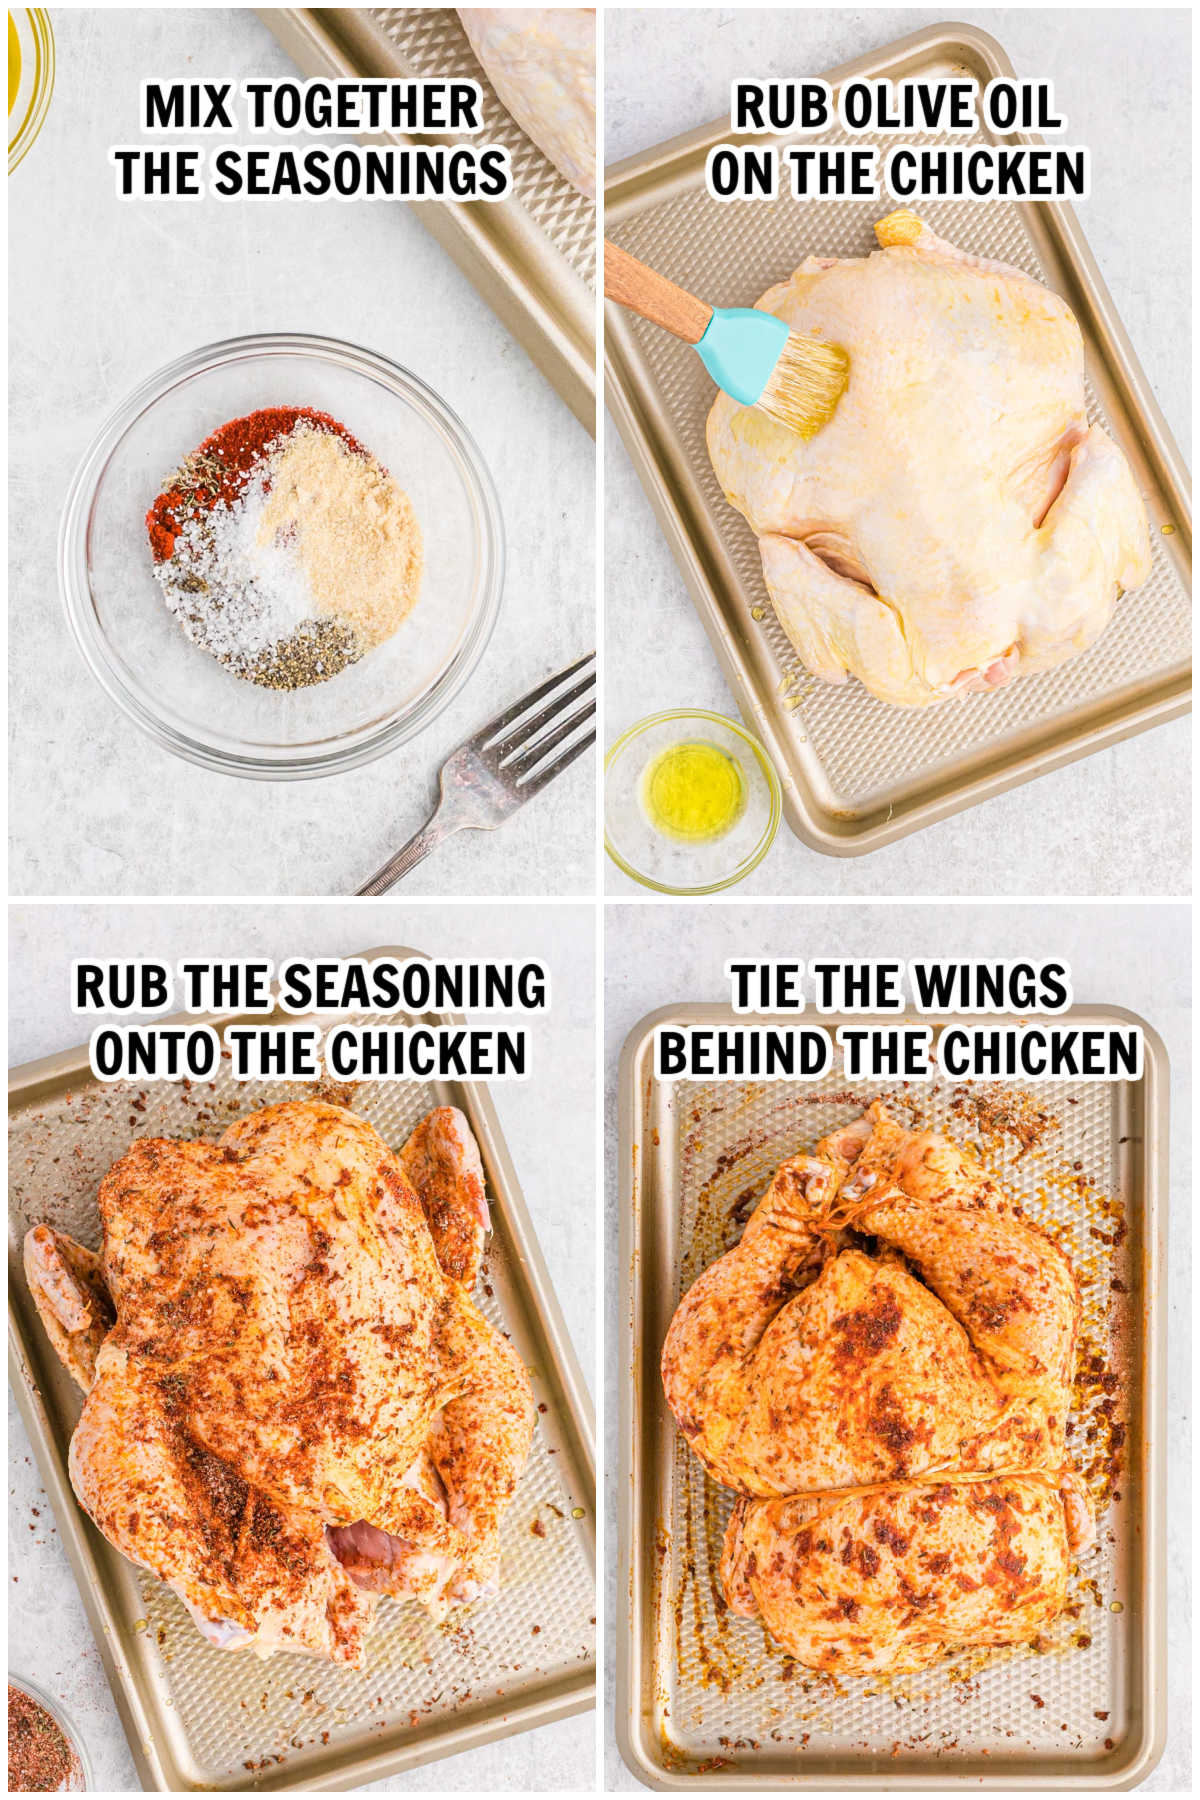 Cook with Kalorik: How-To Truss Your Rotisserie Chicken  #MAXXMade  rotisserie chicken is easy to make and even tastier to eat. Check out this  step-by-step guide on how to make rotisserie chicken